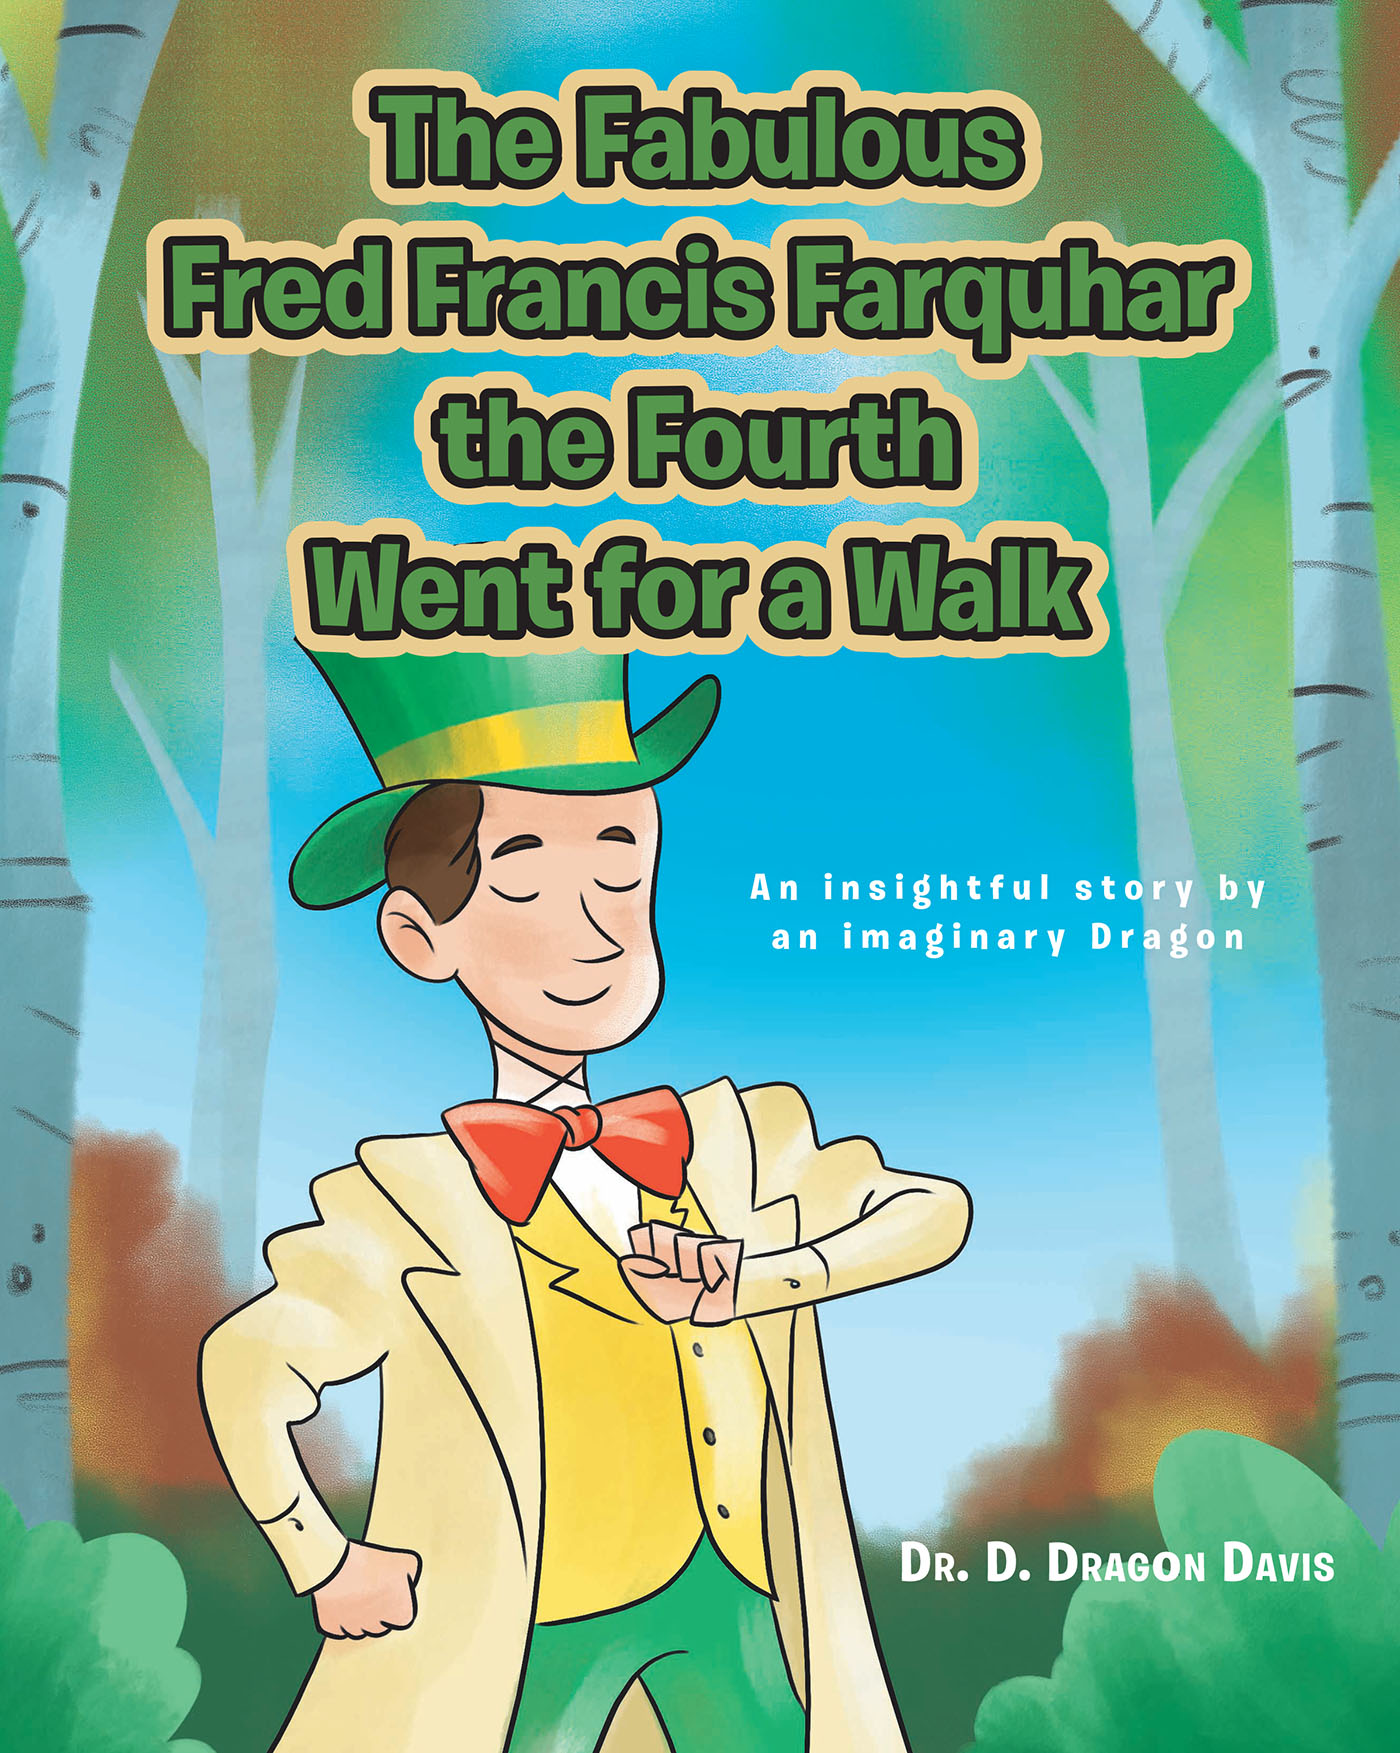 Dr. D. Dragon Davis’s Newly Released "The Fabulous Fred Francis Farquhar the 4th Went for a Walk" is a Delightful Children’s Tale That Encourages a Sense of Faith